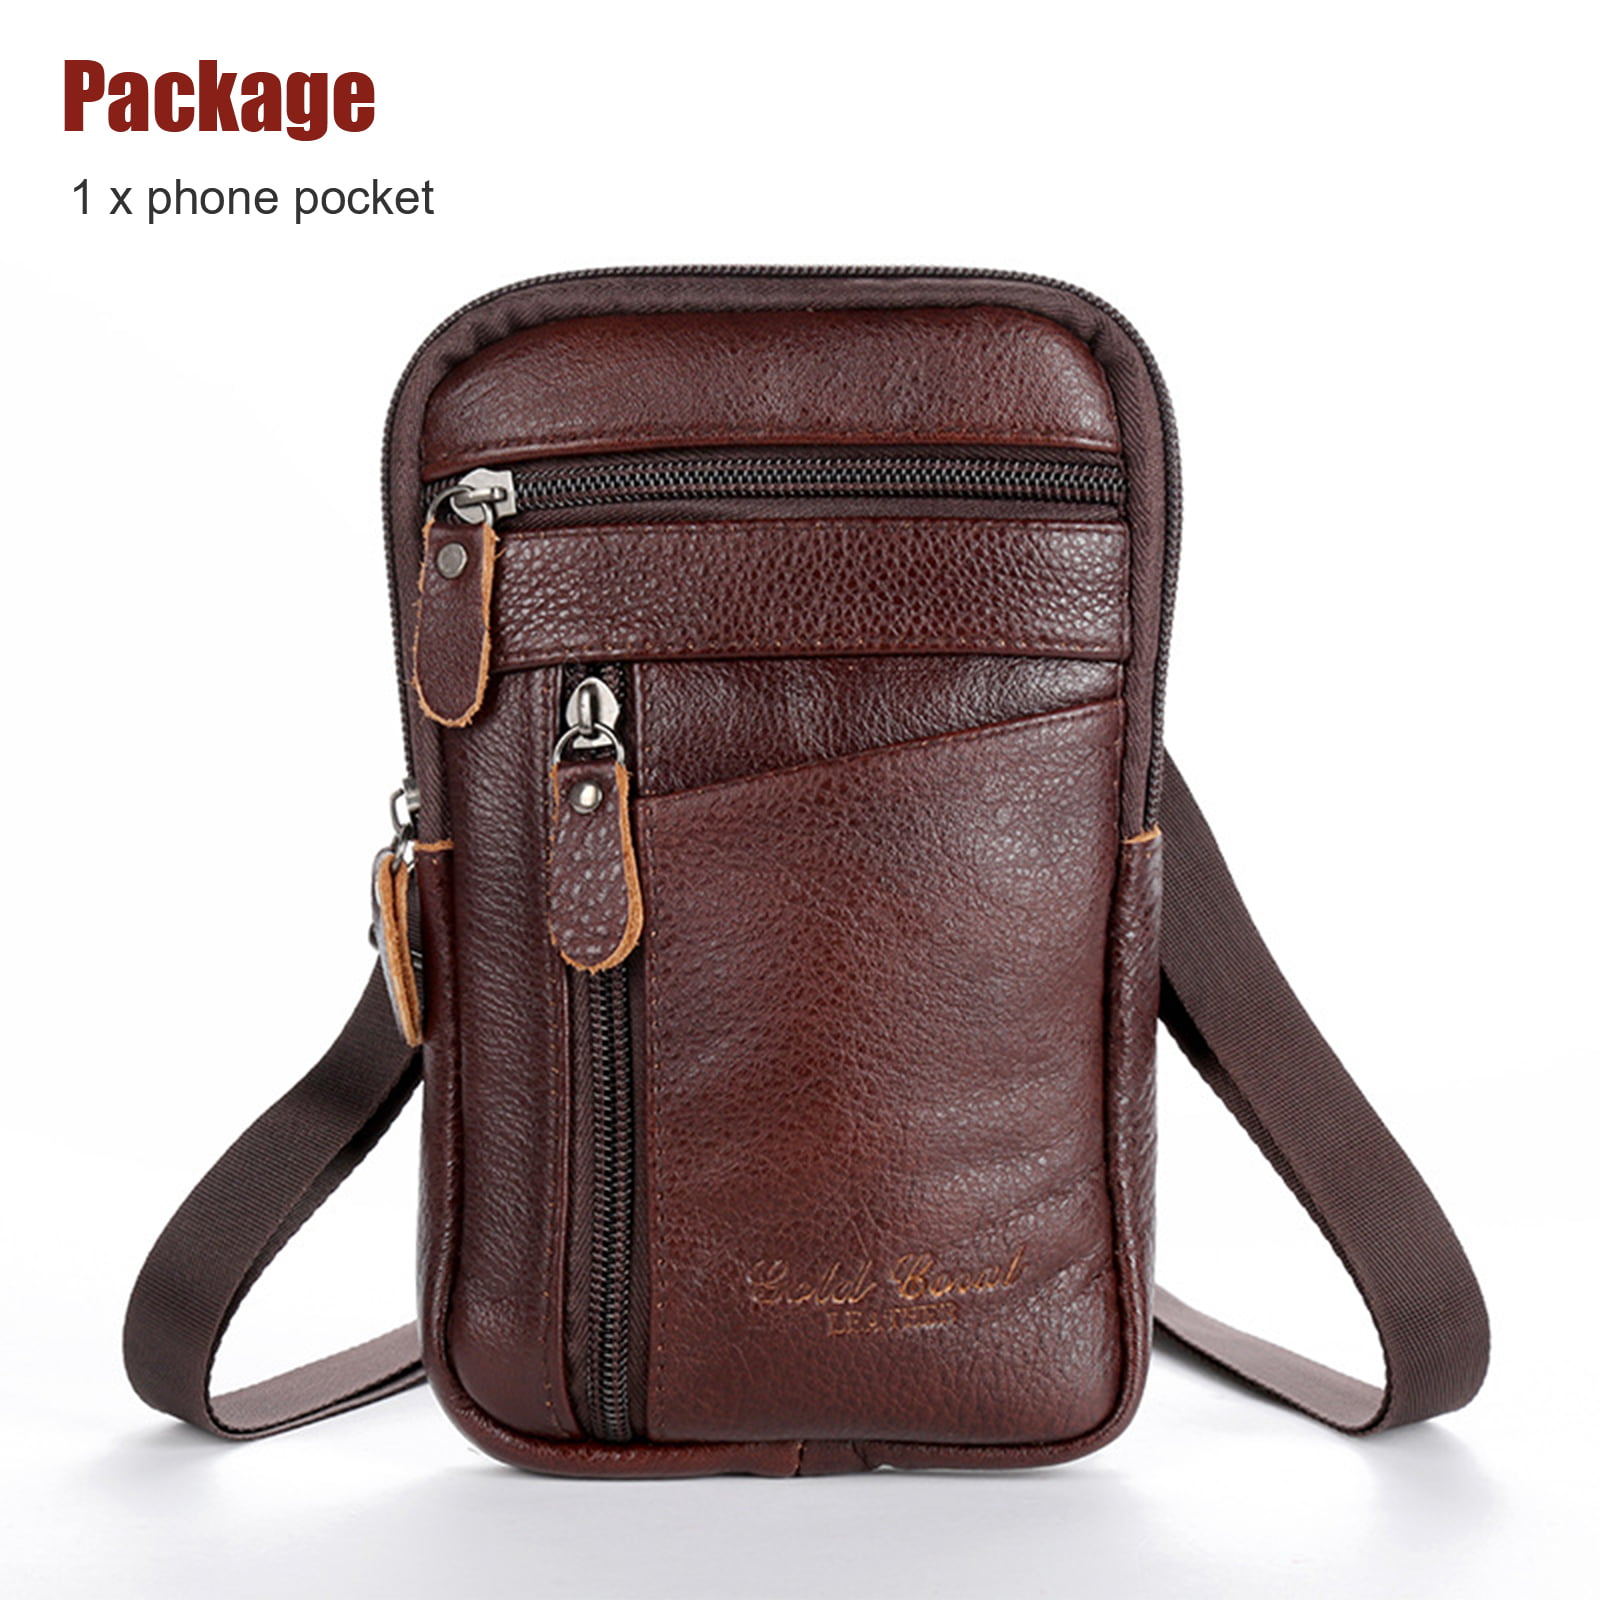 Small Polyester Bag With Belt Loop Carry Handle Neck Strap 5 Zips Phone Pocket. 